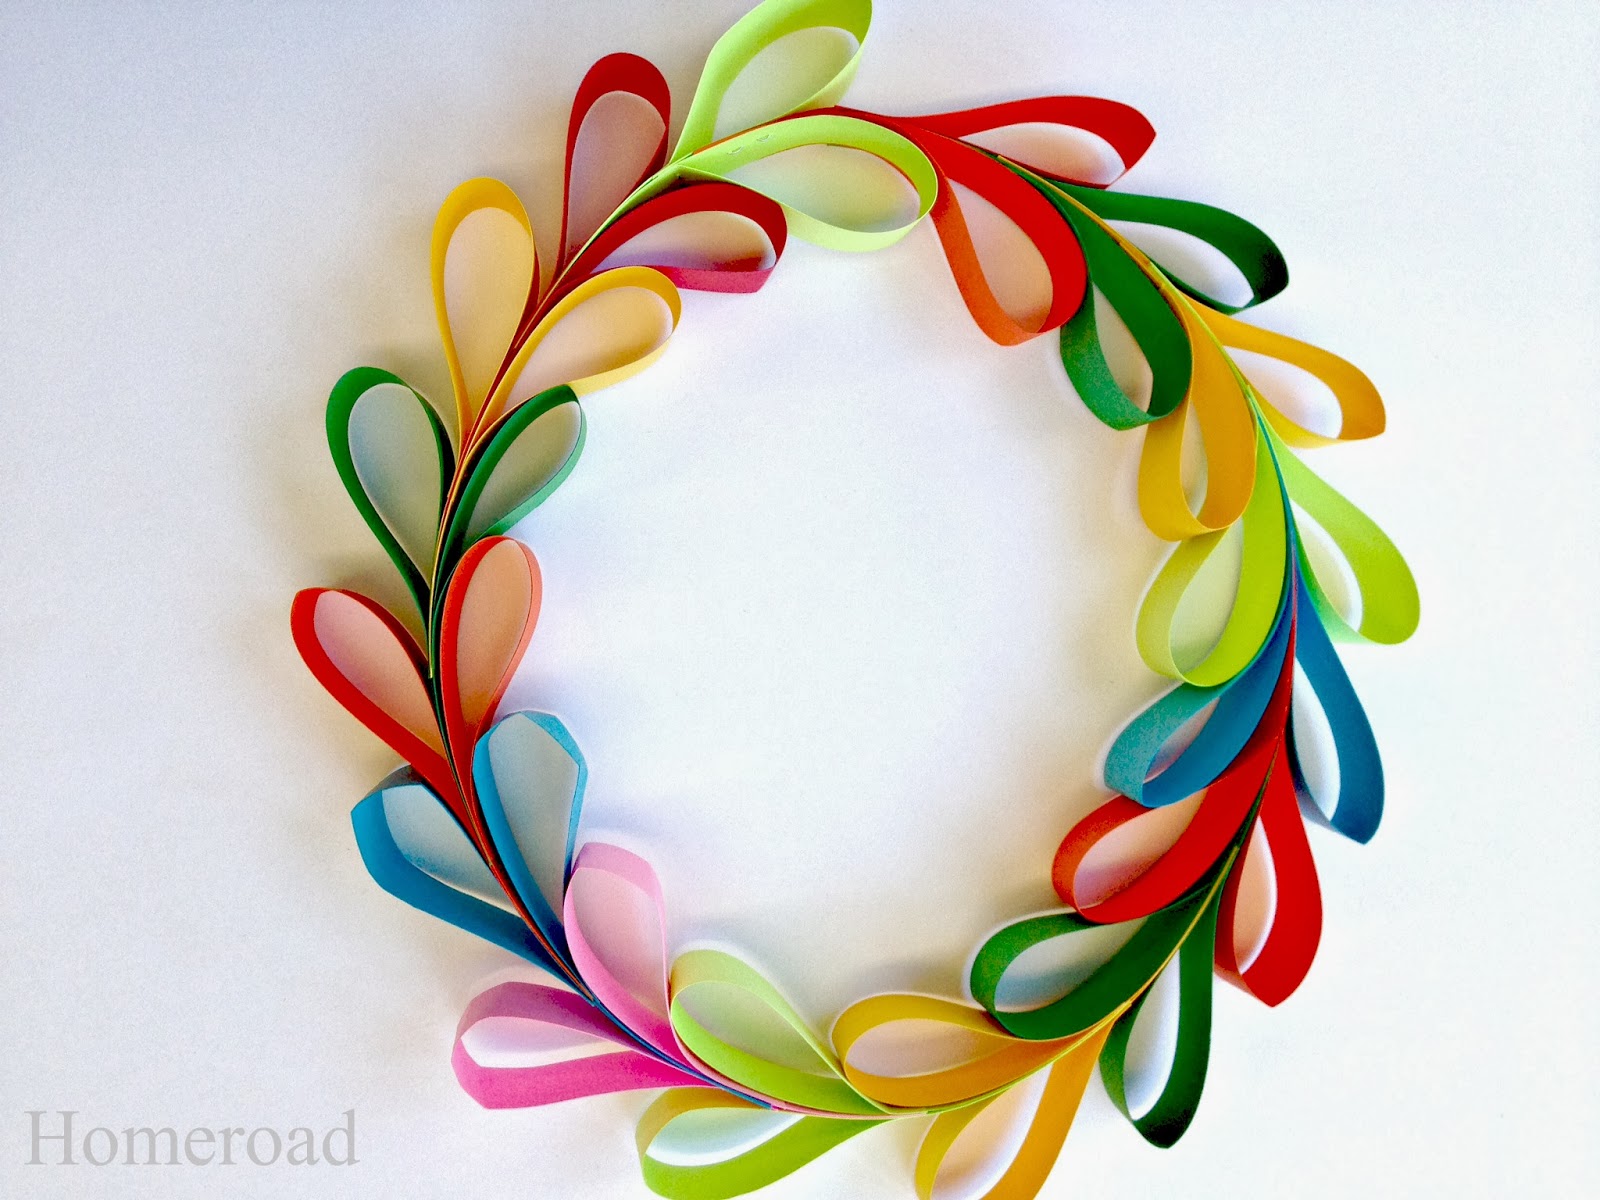 Paper Heart Wreath for Valentine's Day | Homeroad